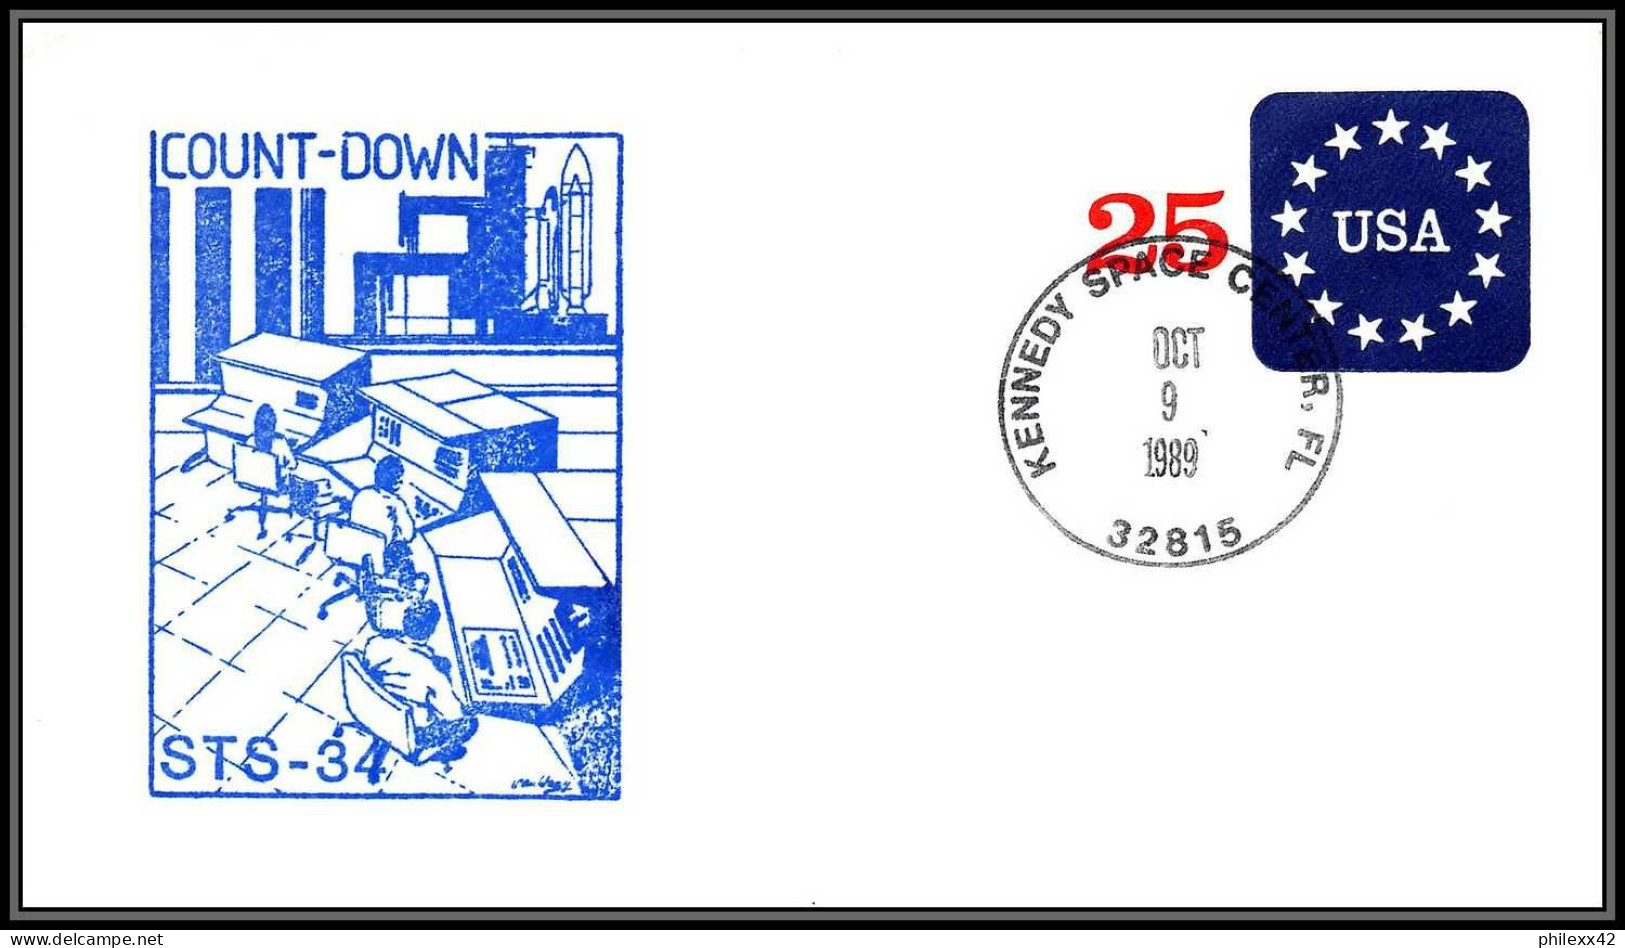 1814 Espace (space) Entier Postal (Stamped Stationery) USA STS 34 Count Down Atlantis Navette Shuttle - 9/10/1989 - Etats-Unis